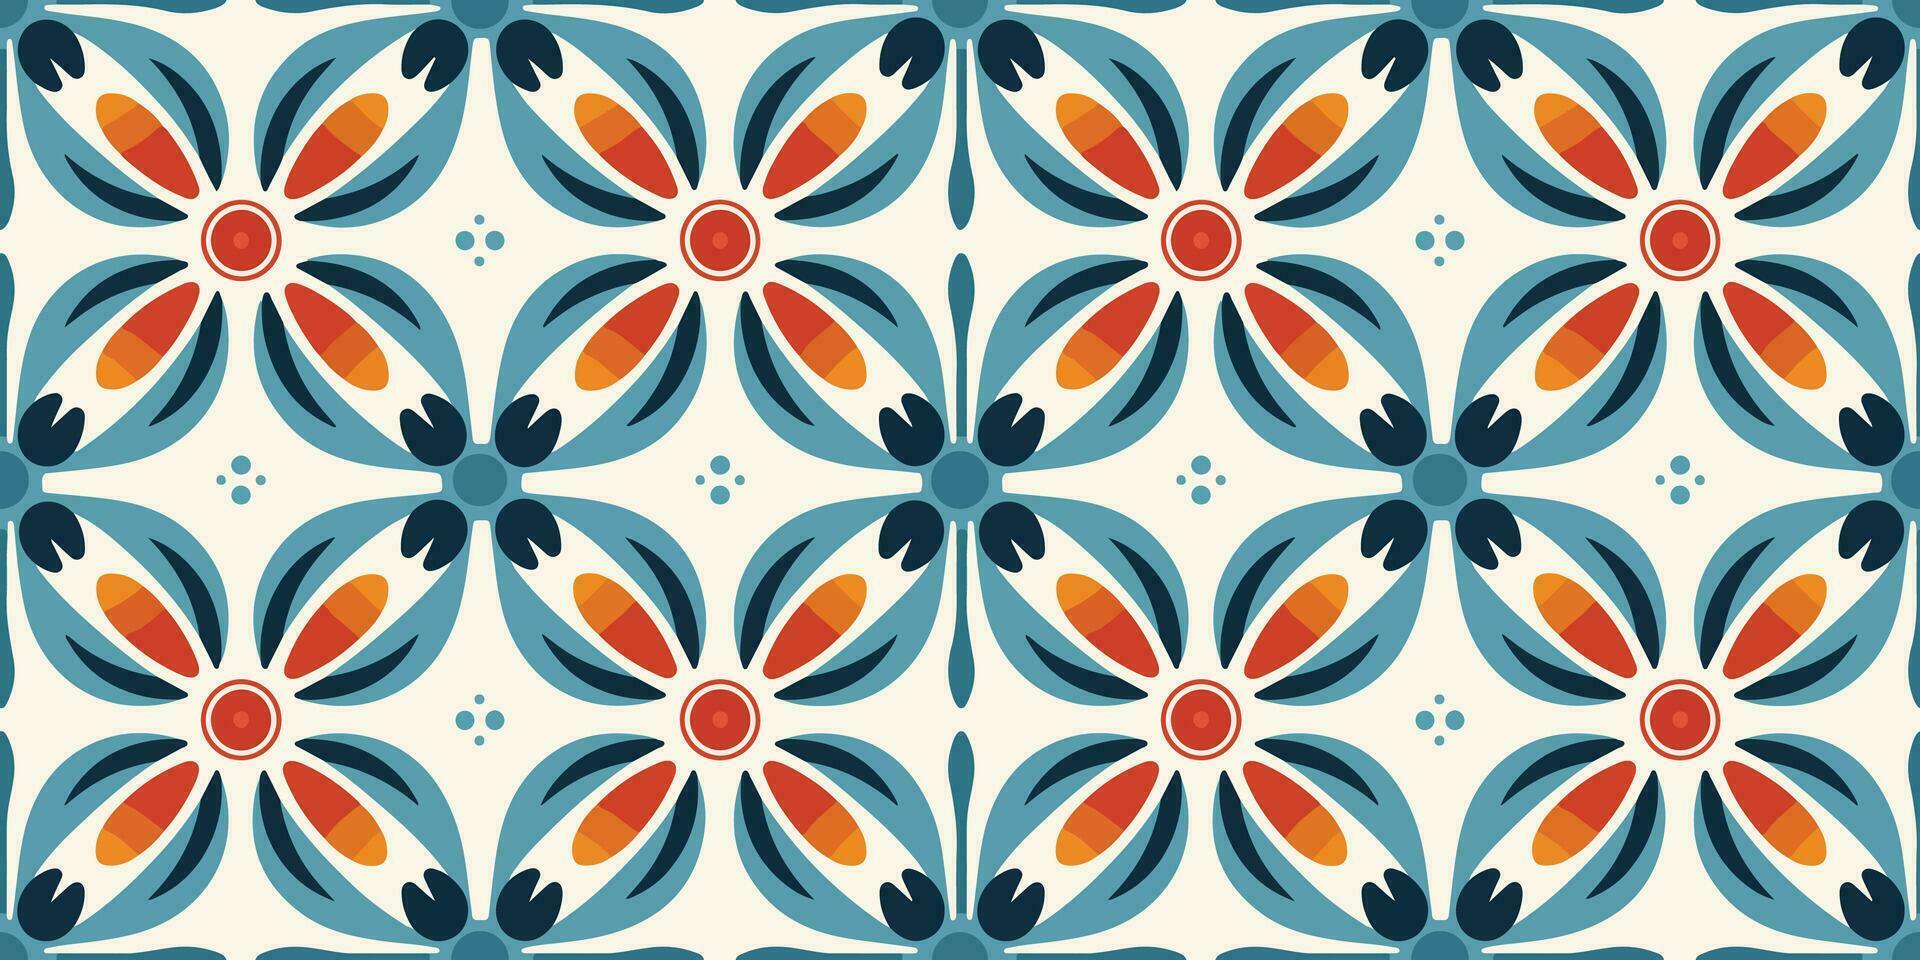 Scandinavian Style Tile. Ethnic Vector Seamless Floral Pattern. Abstract Square Geometric Swatch for Wrapping Paper